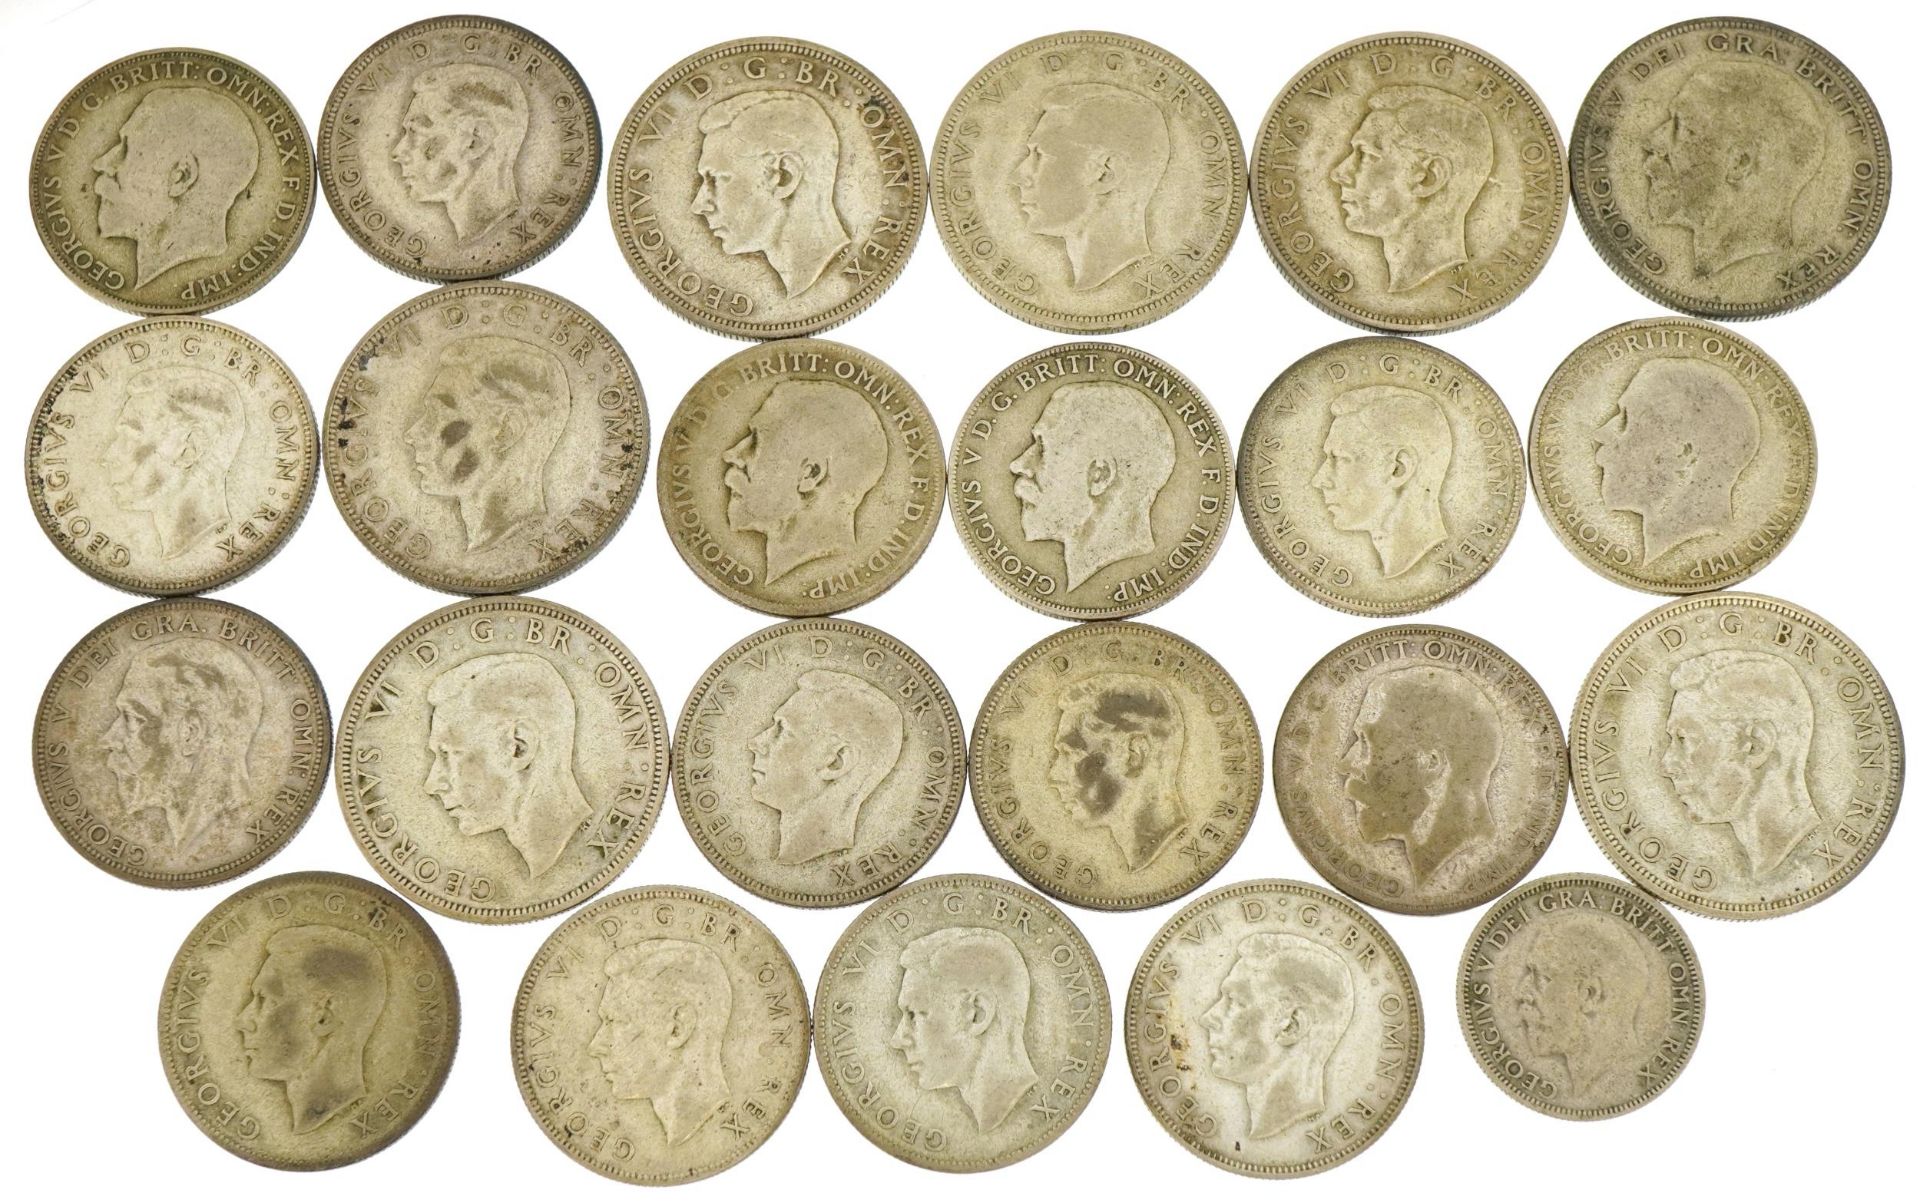 British pre decimal pre 1947 coinage including half crowns and florins, 265.0g For further